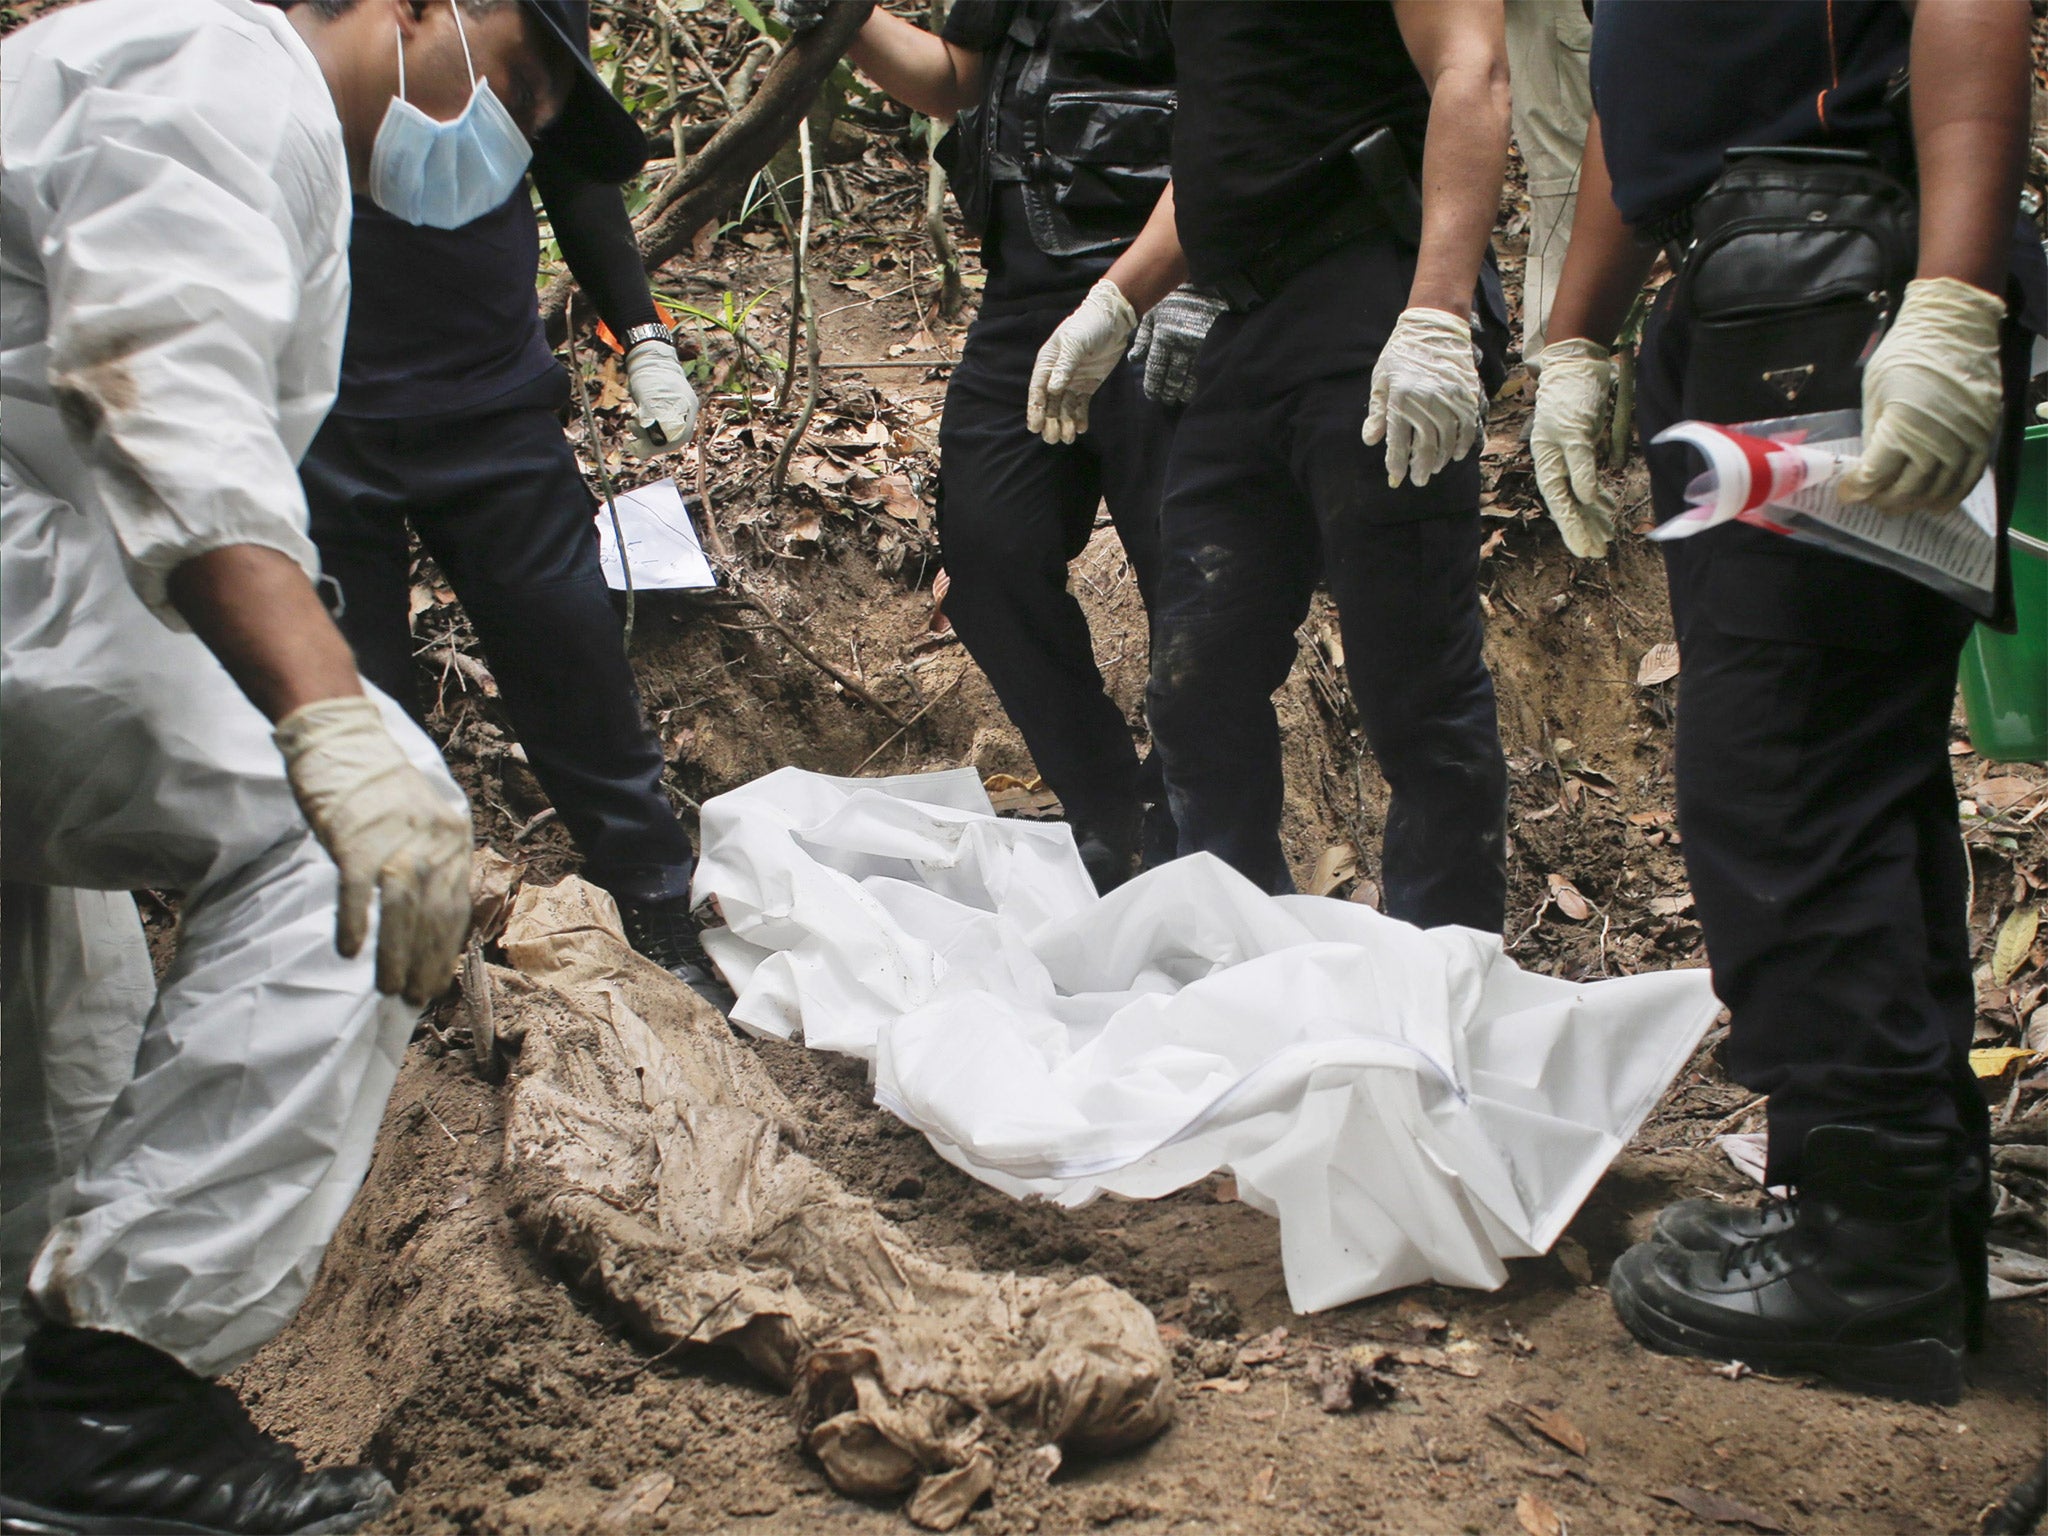 A forensic team exhumes human remains in Perlis, northern Malaysia